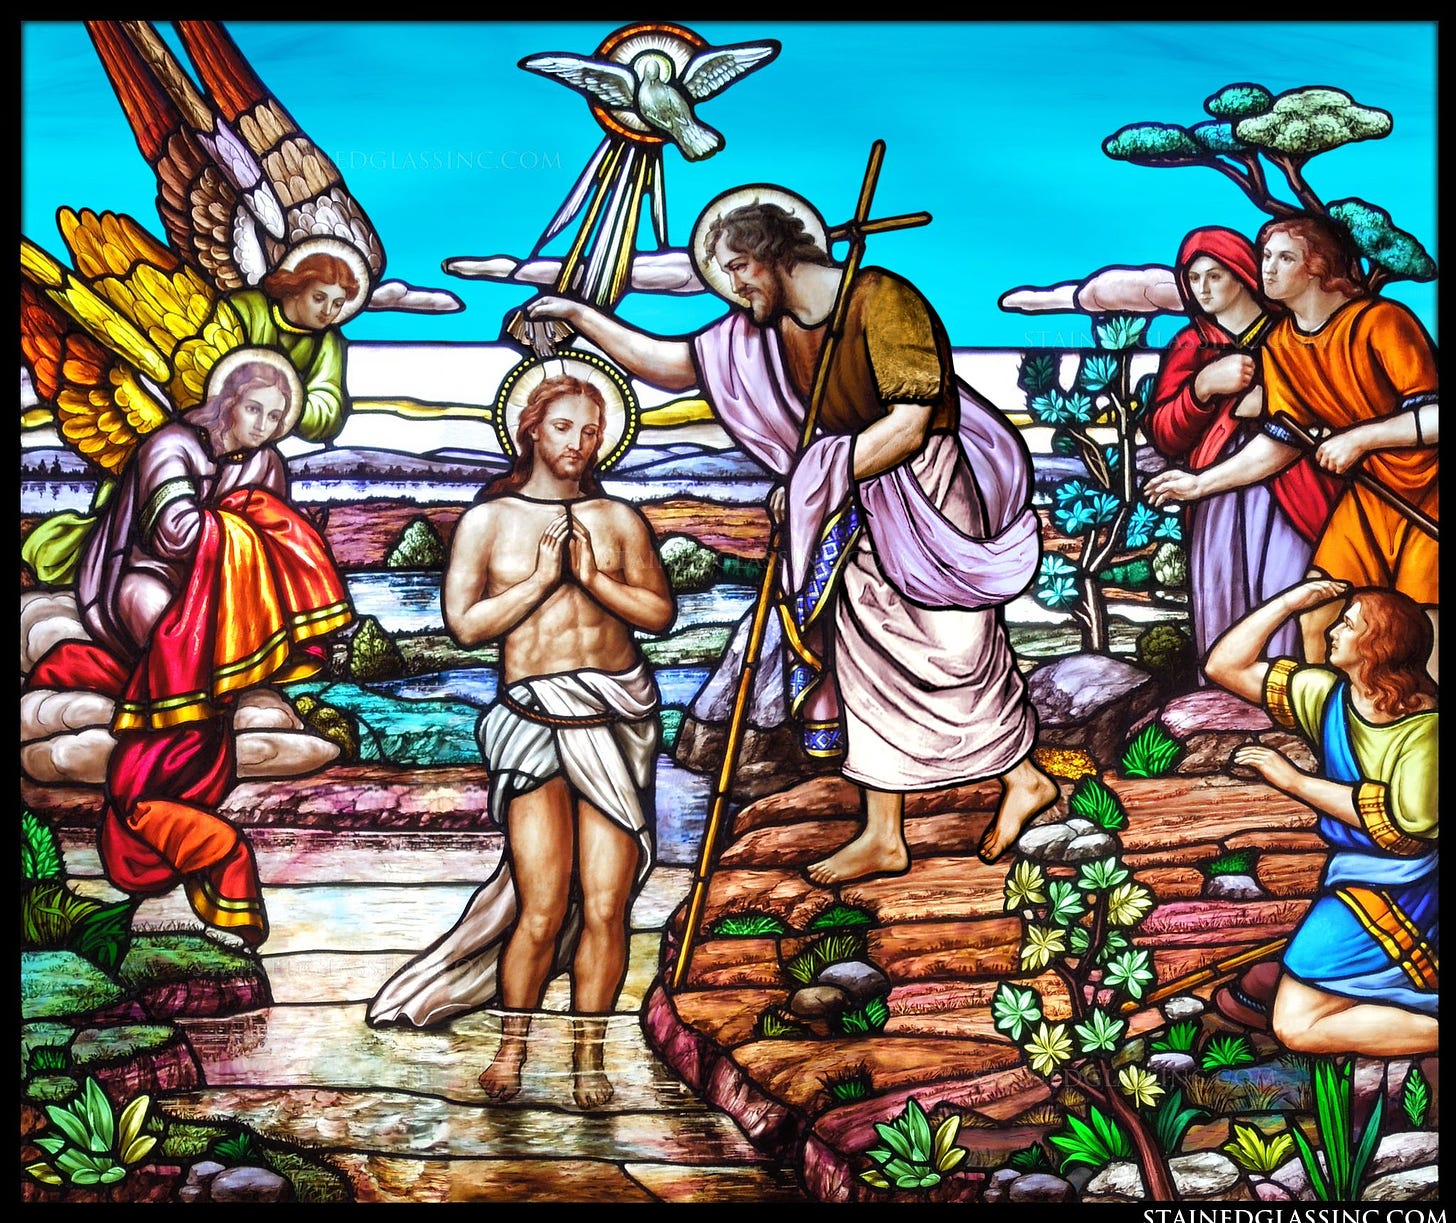 "The Baptism of Jesus by John the Baptist" Religious Stained Glass Window